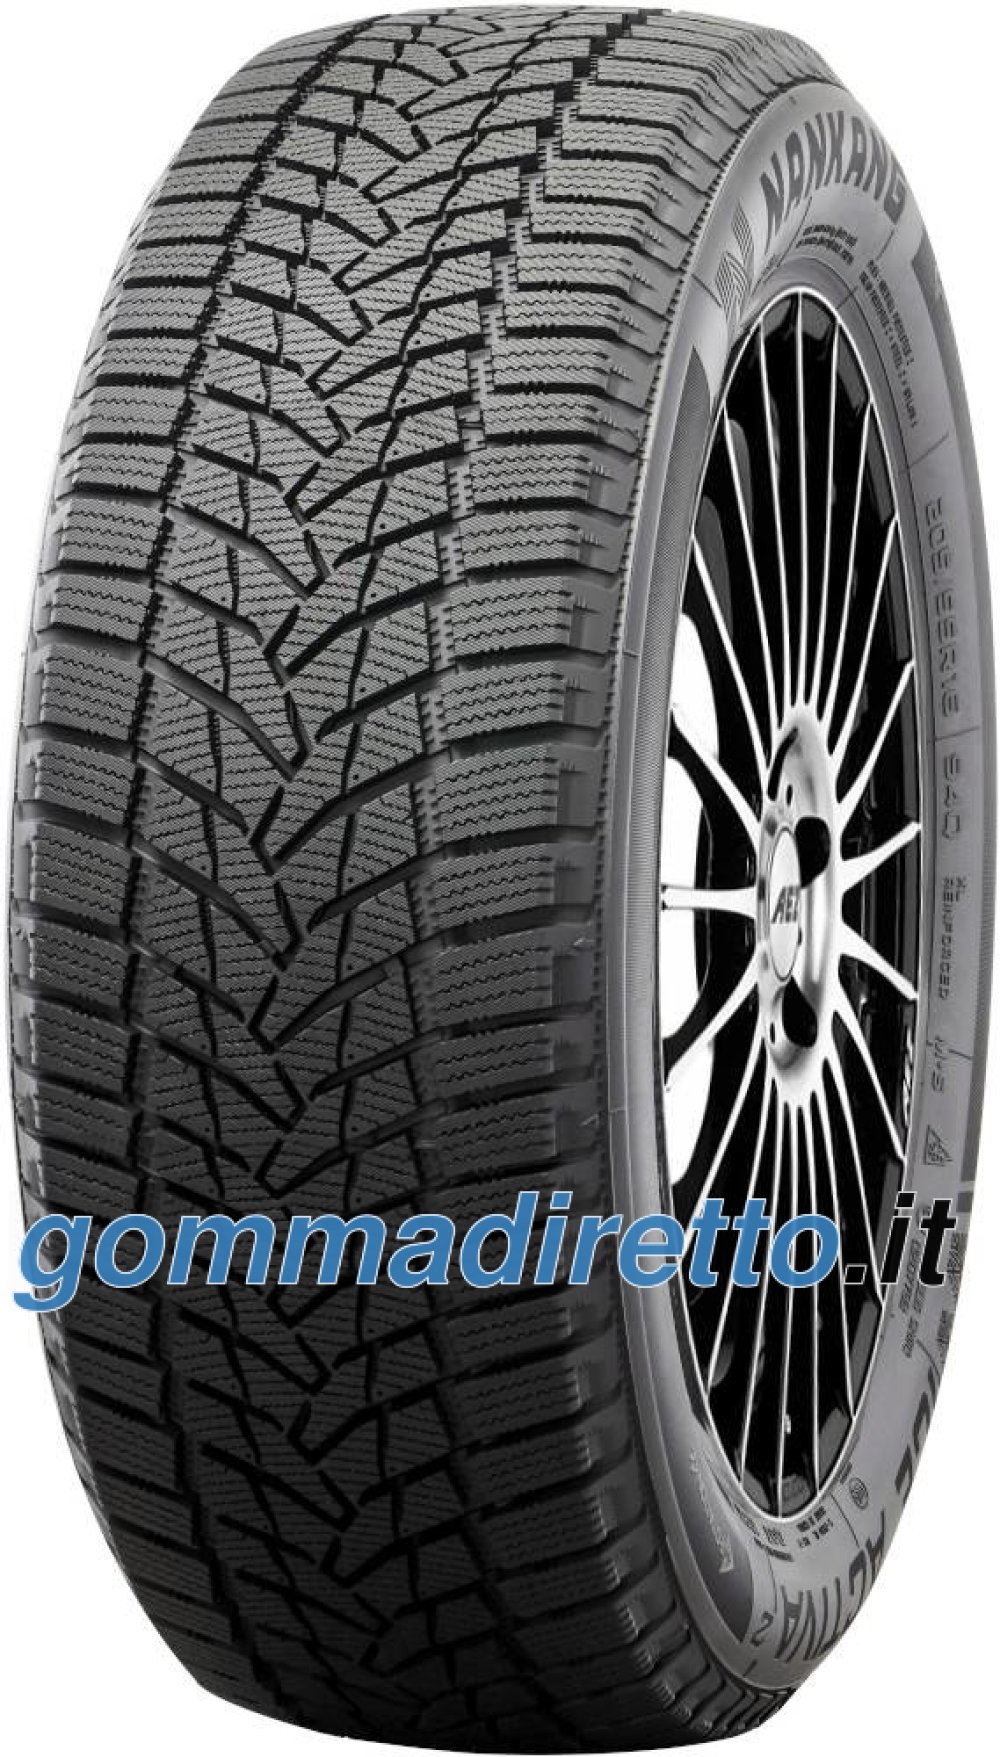 Image of        Nankang ICE ACTIVA 2 ( 215/65 R17 103T XL, Nordic compound )